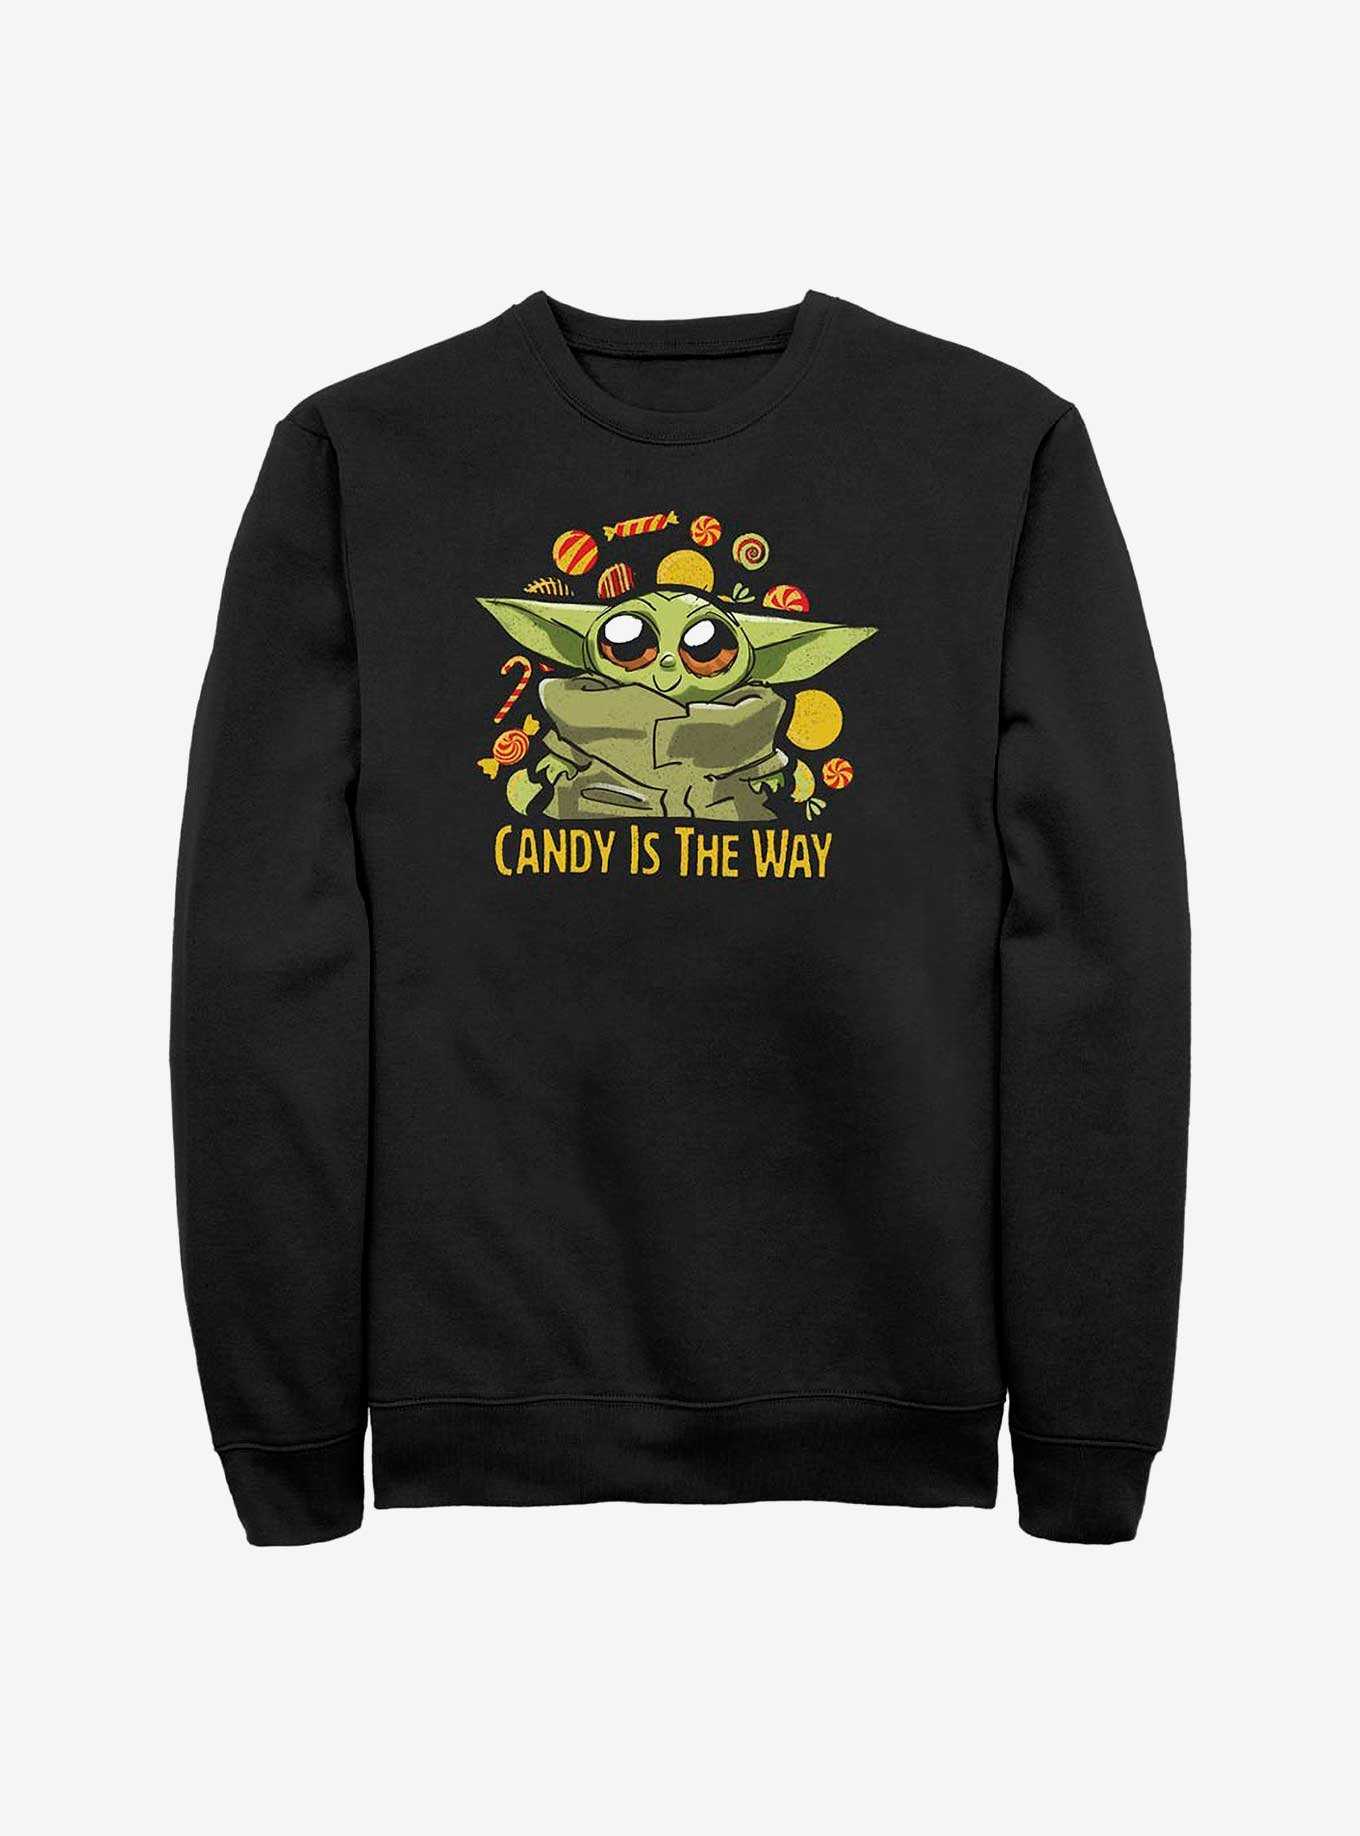 Star Wars The Mandalorian The Child Candy Is The Way Sweatshirt, , hi-res